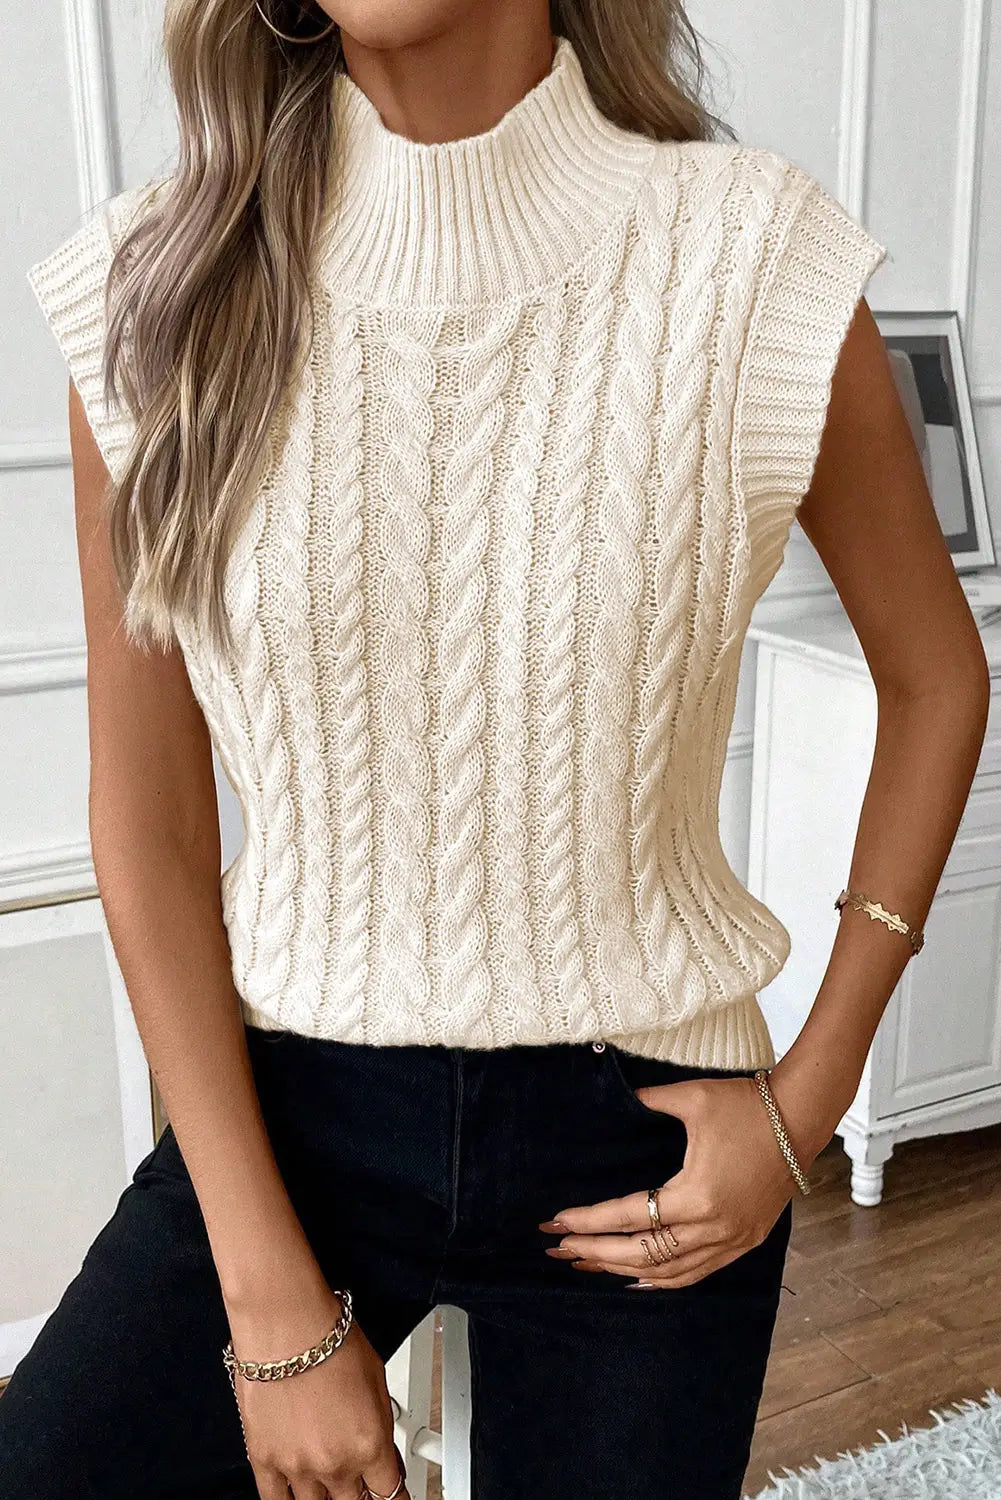 Oatmeal cable knit high neck sweater vest - l 100% acrylic sweaters & cardigans